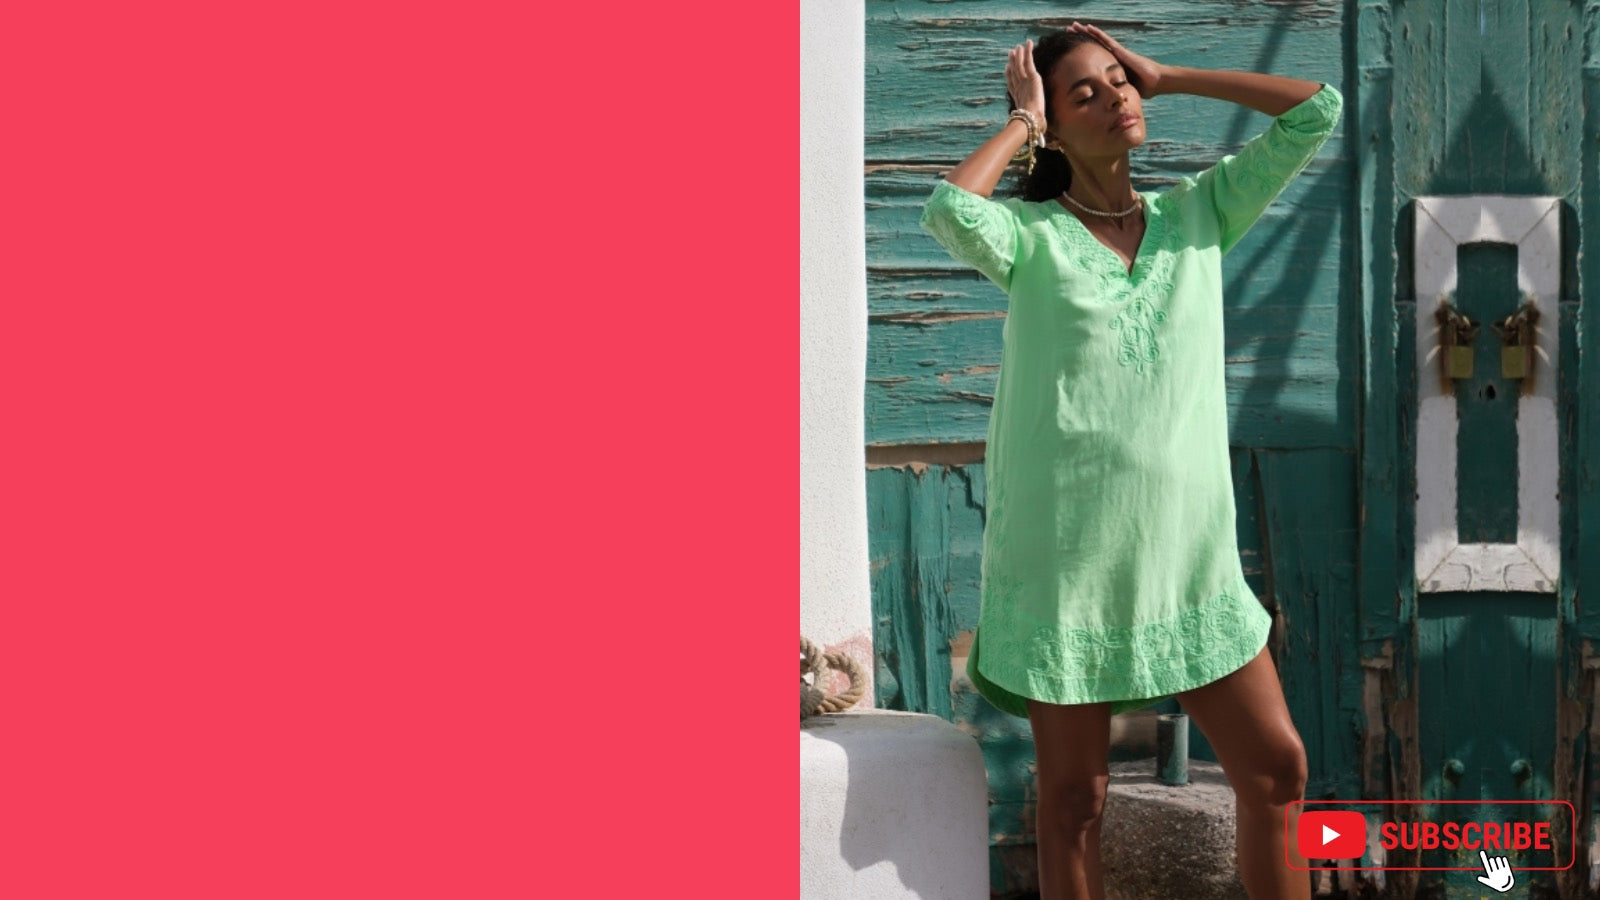 Load video: summer-wardrobe-inspiration-best-holiday-and-weekend-looks-by-pranella-and-inoa-lindesy-brown.jpg